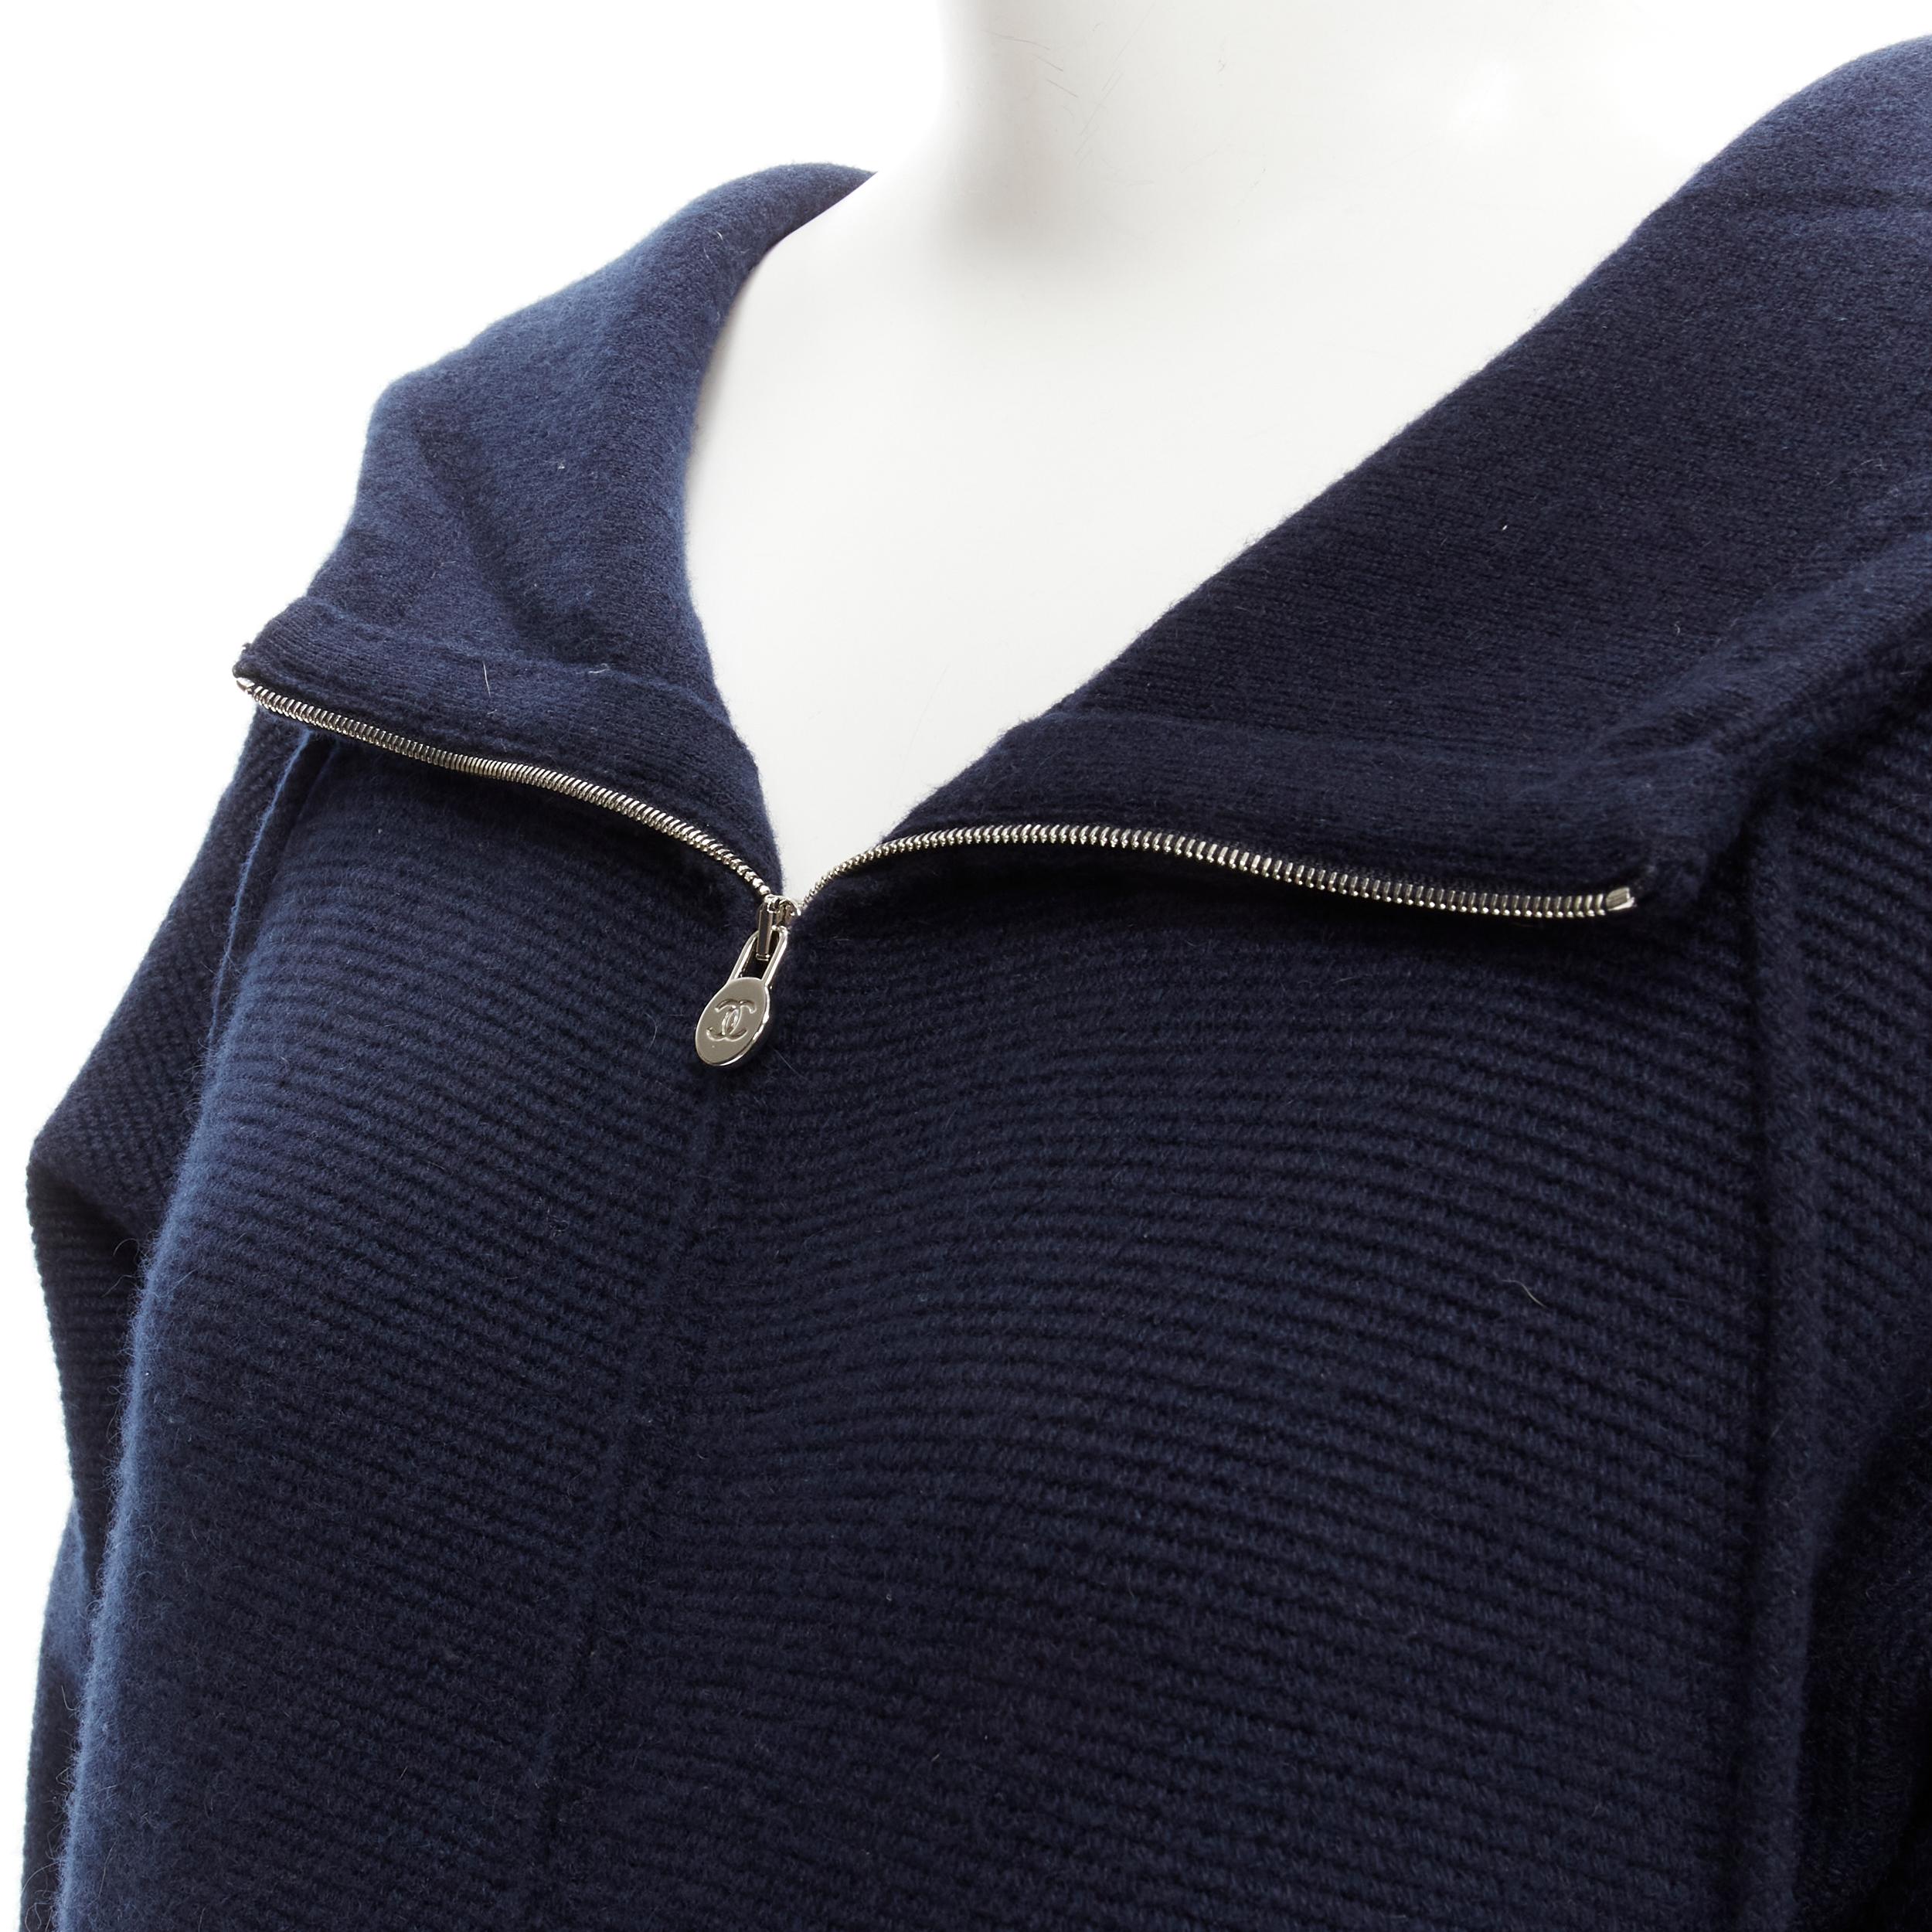 CHANEL 100% cashmere navy silver CC zip up hooded sweater FR34 XS 
Reference: JACG/A00022 
Brand: Chanel 
Material: Cashmere 
Color: Navy 
Pattern: Solid 
Closure: Zip 
Extra Detail: Drawstring hood. CC button front pockets. Drawstring at hem.